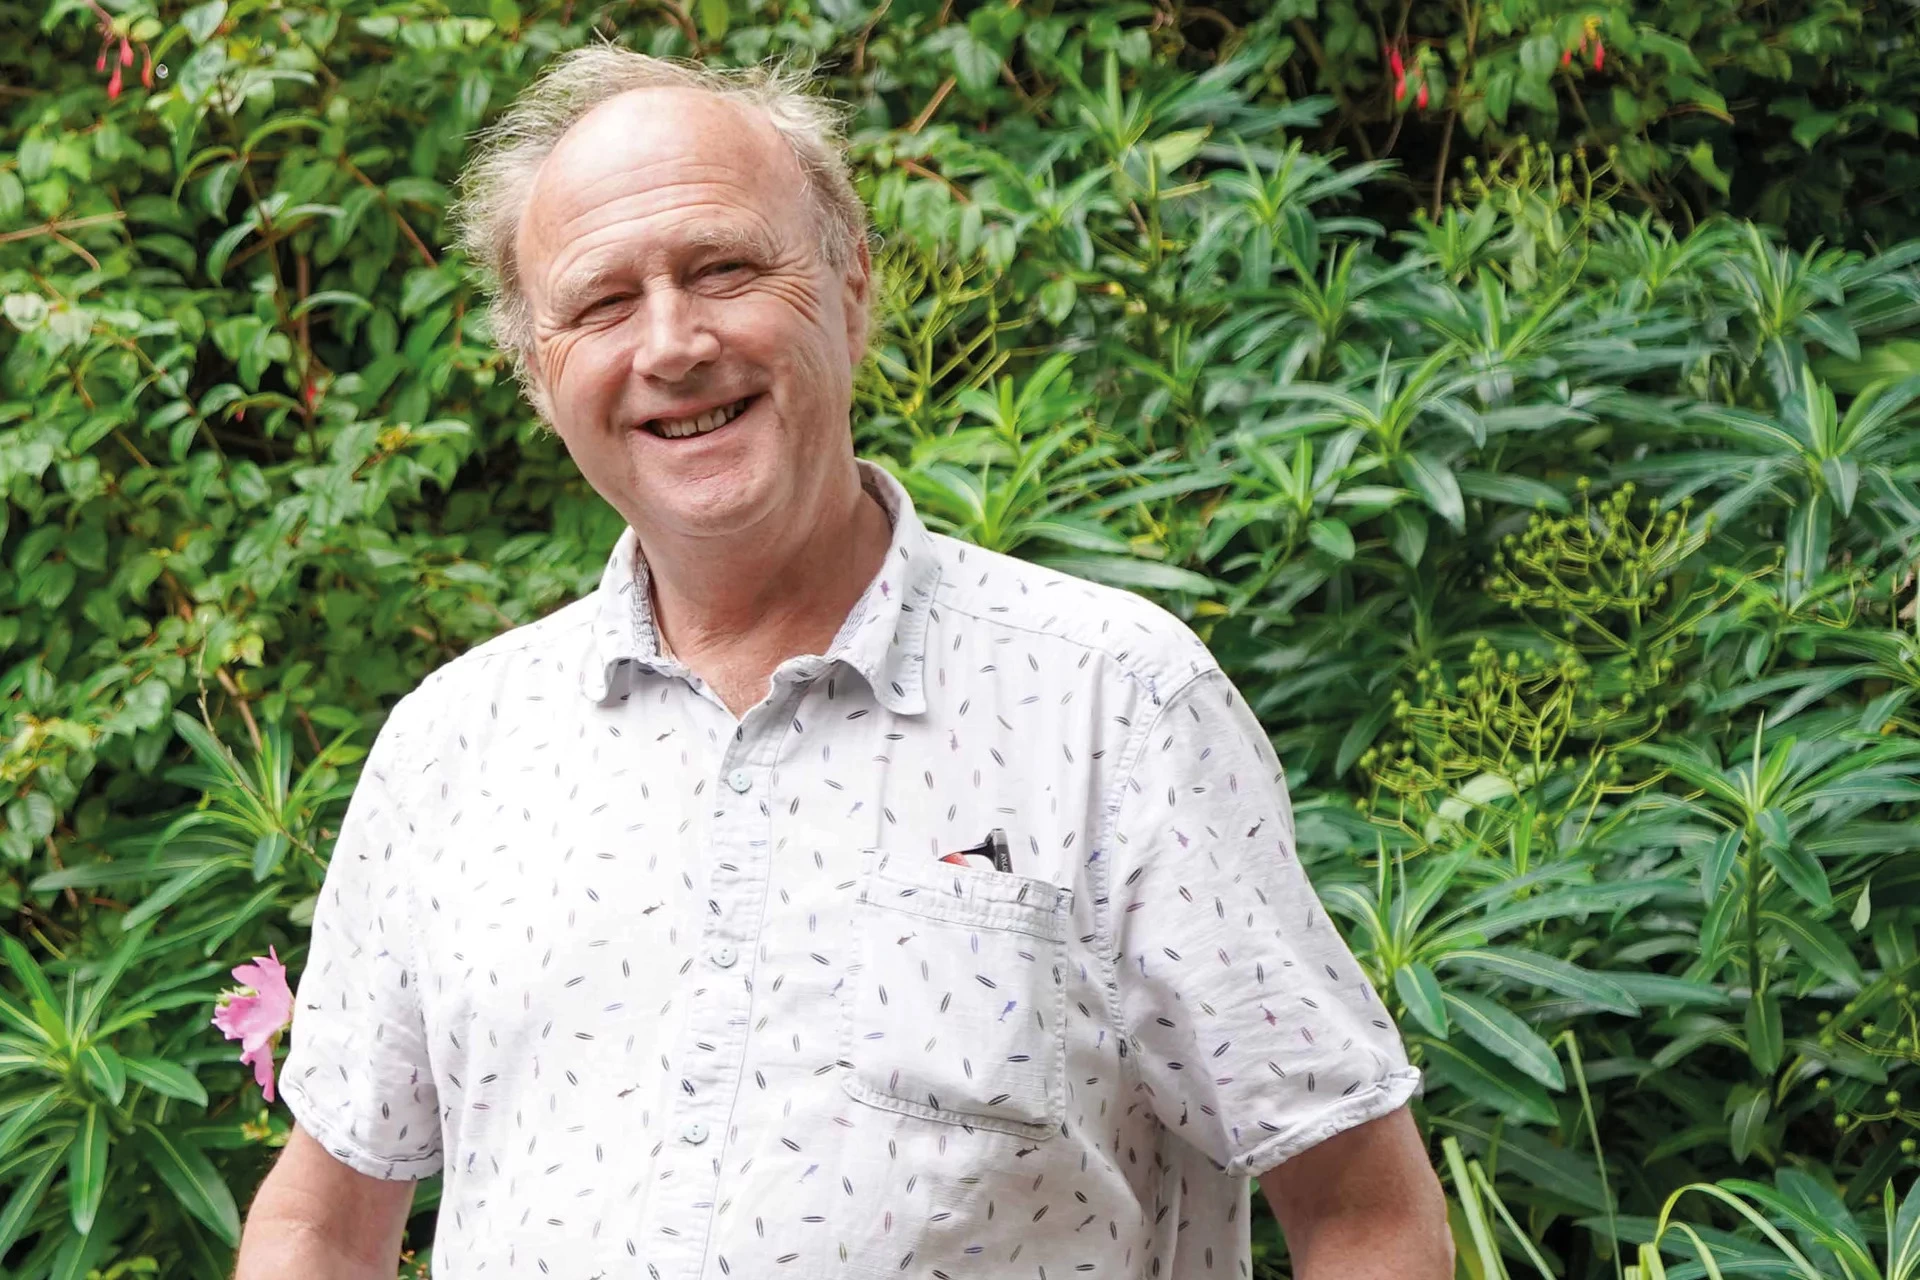 "Sir Tim Smit KBE, founder of The Eden Project, smiling at the camera, wearing a white  patterned shirt, stood infront of a green garden."